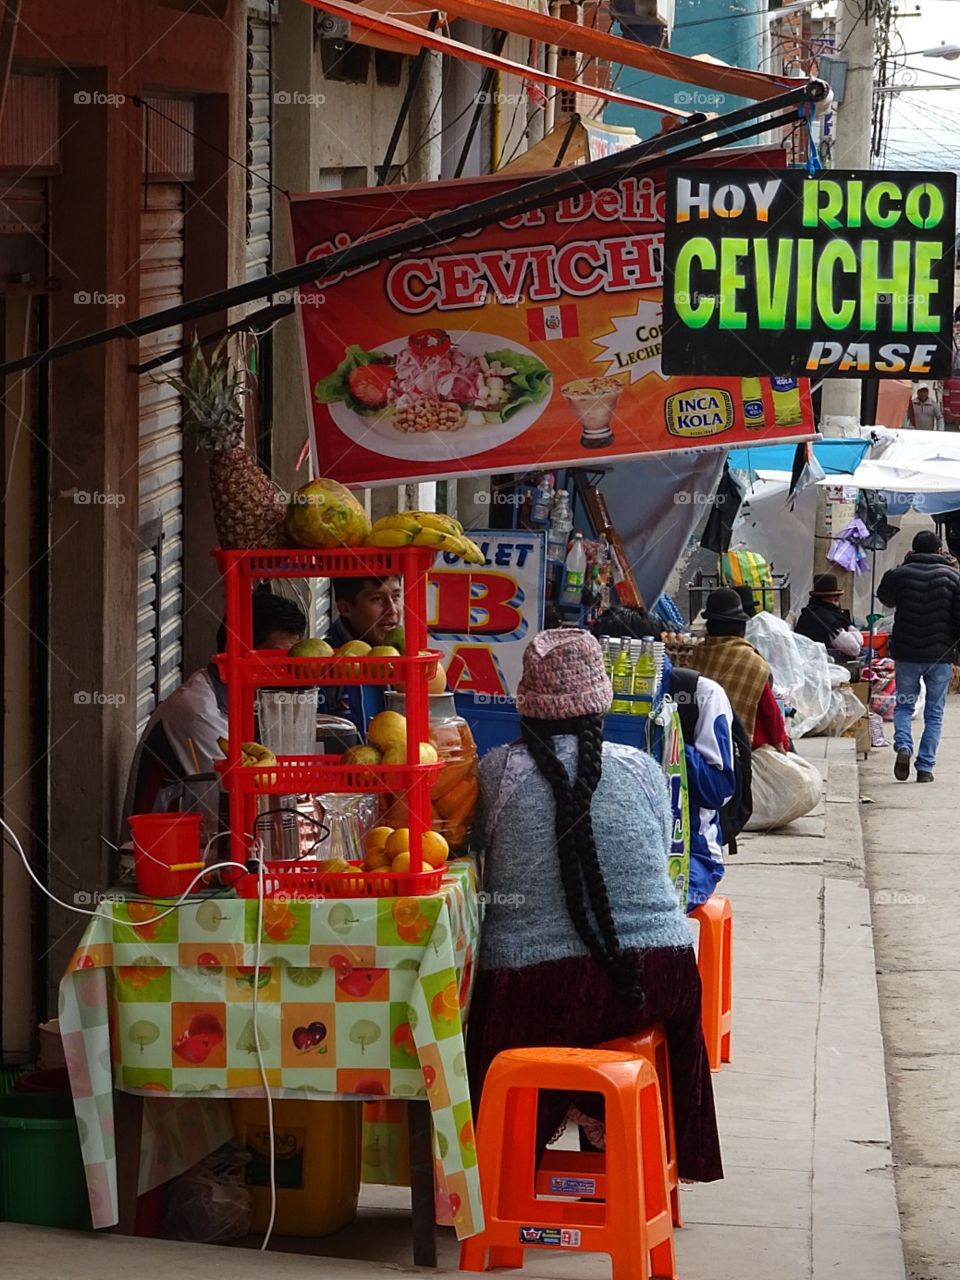 The best ceviche place in town. Copacabana, Bolivia